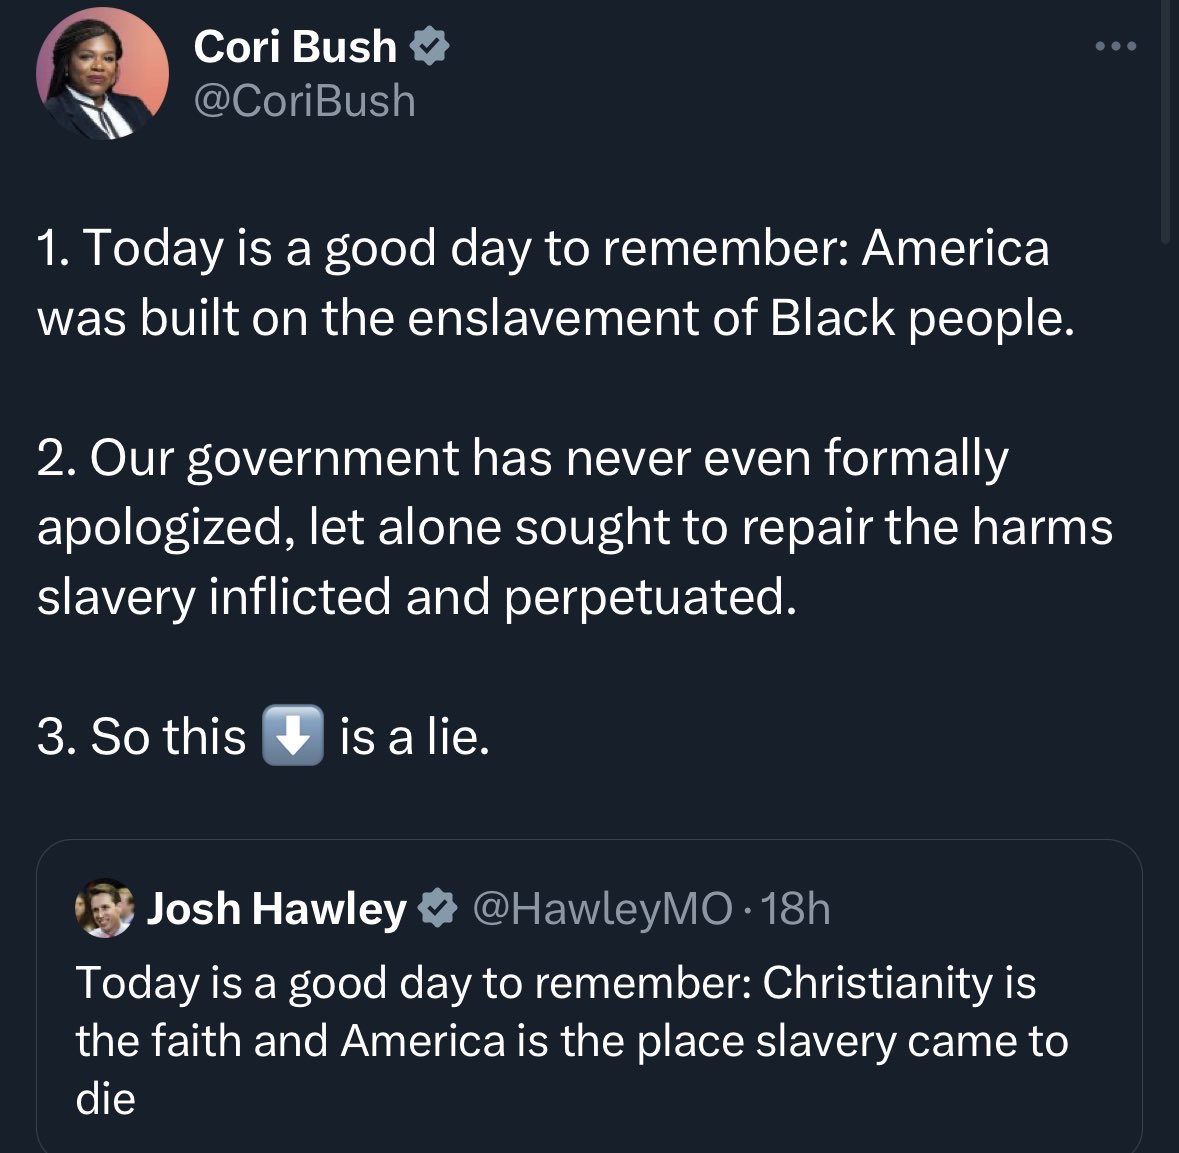 They think there was a slave in every household, that slaves were not just laborers, but architects and inventors too. Probably because the reality of being owned by less than 1% of people and used as farm implements doesn’t justify reparations and isn’t a very glorious past.